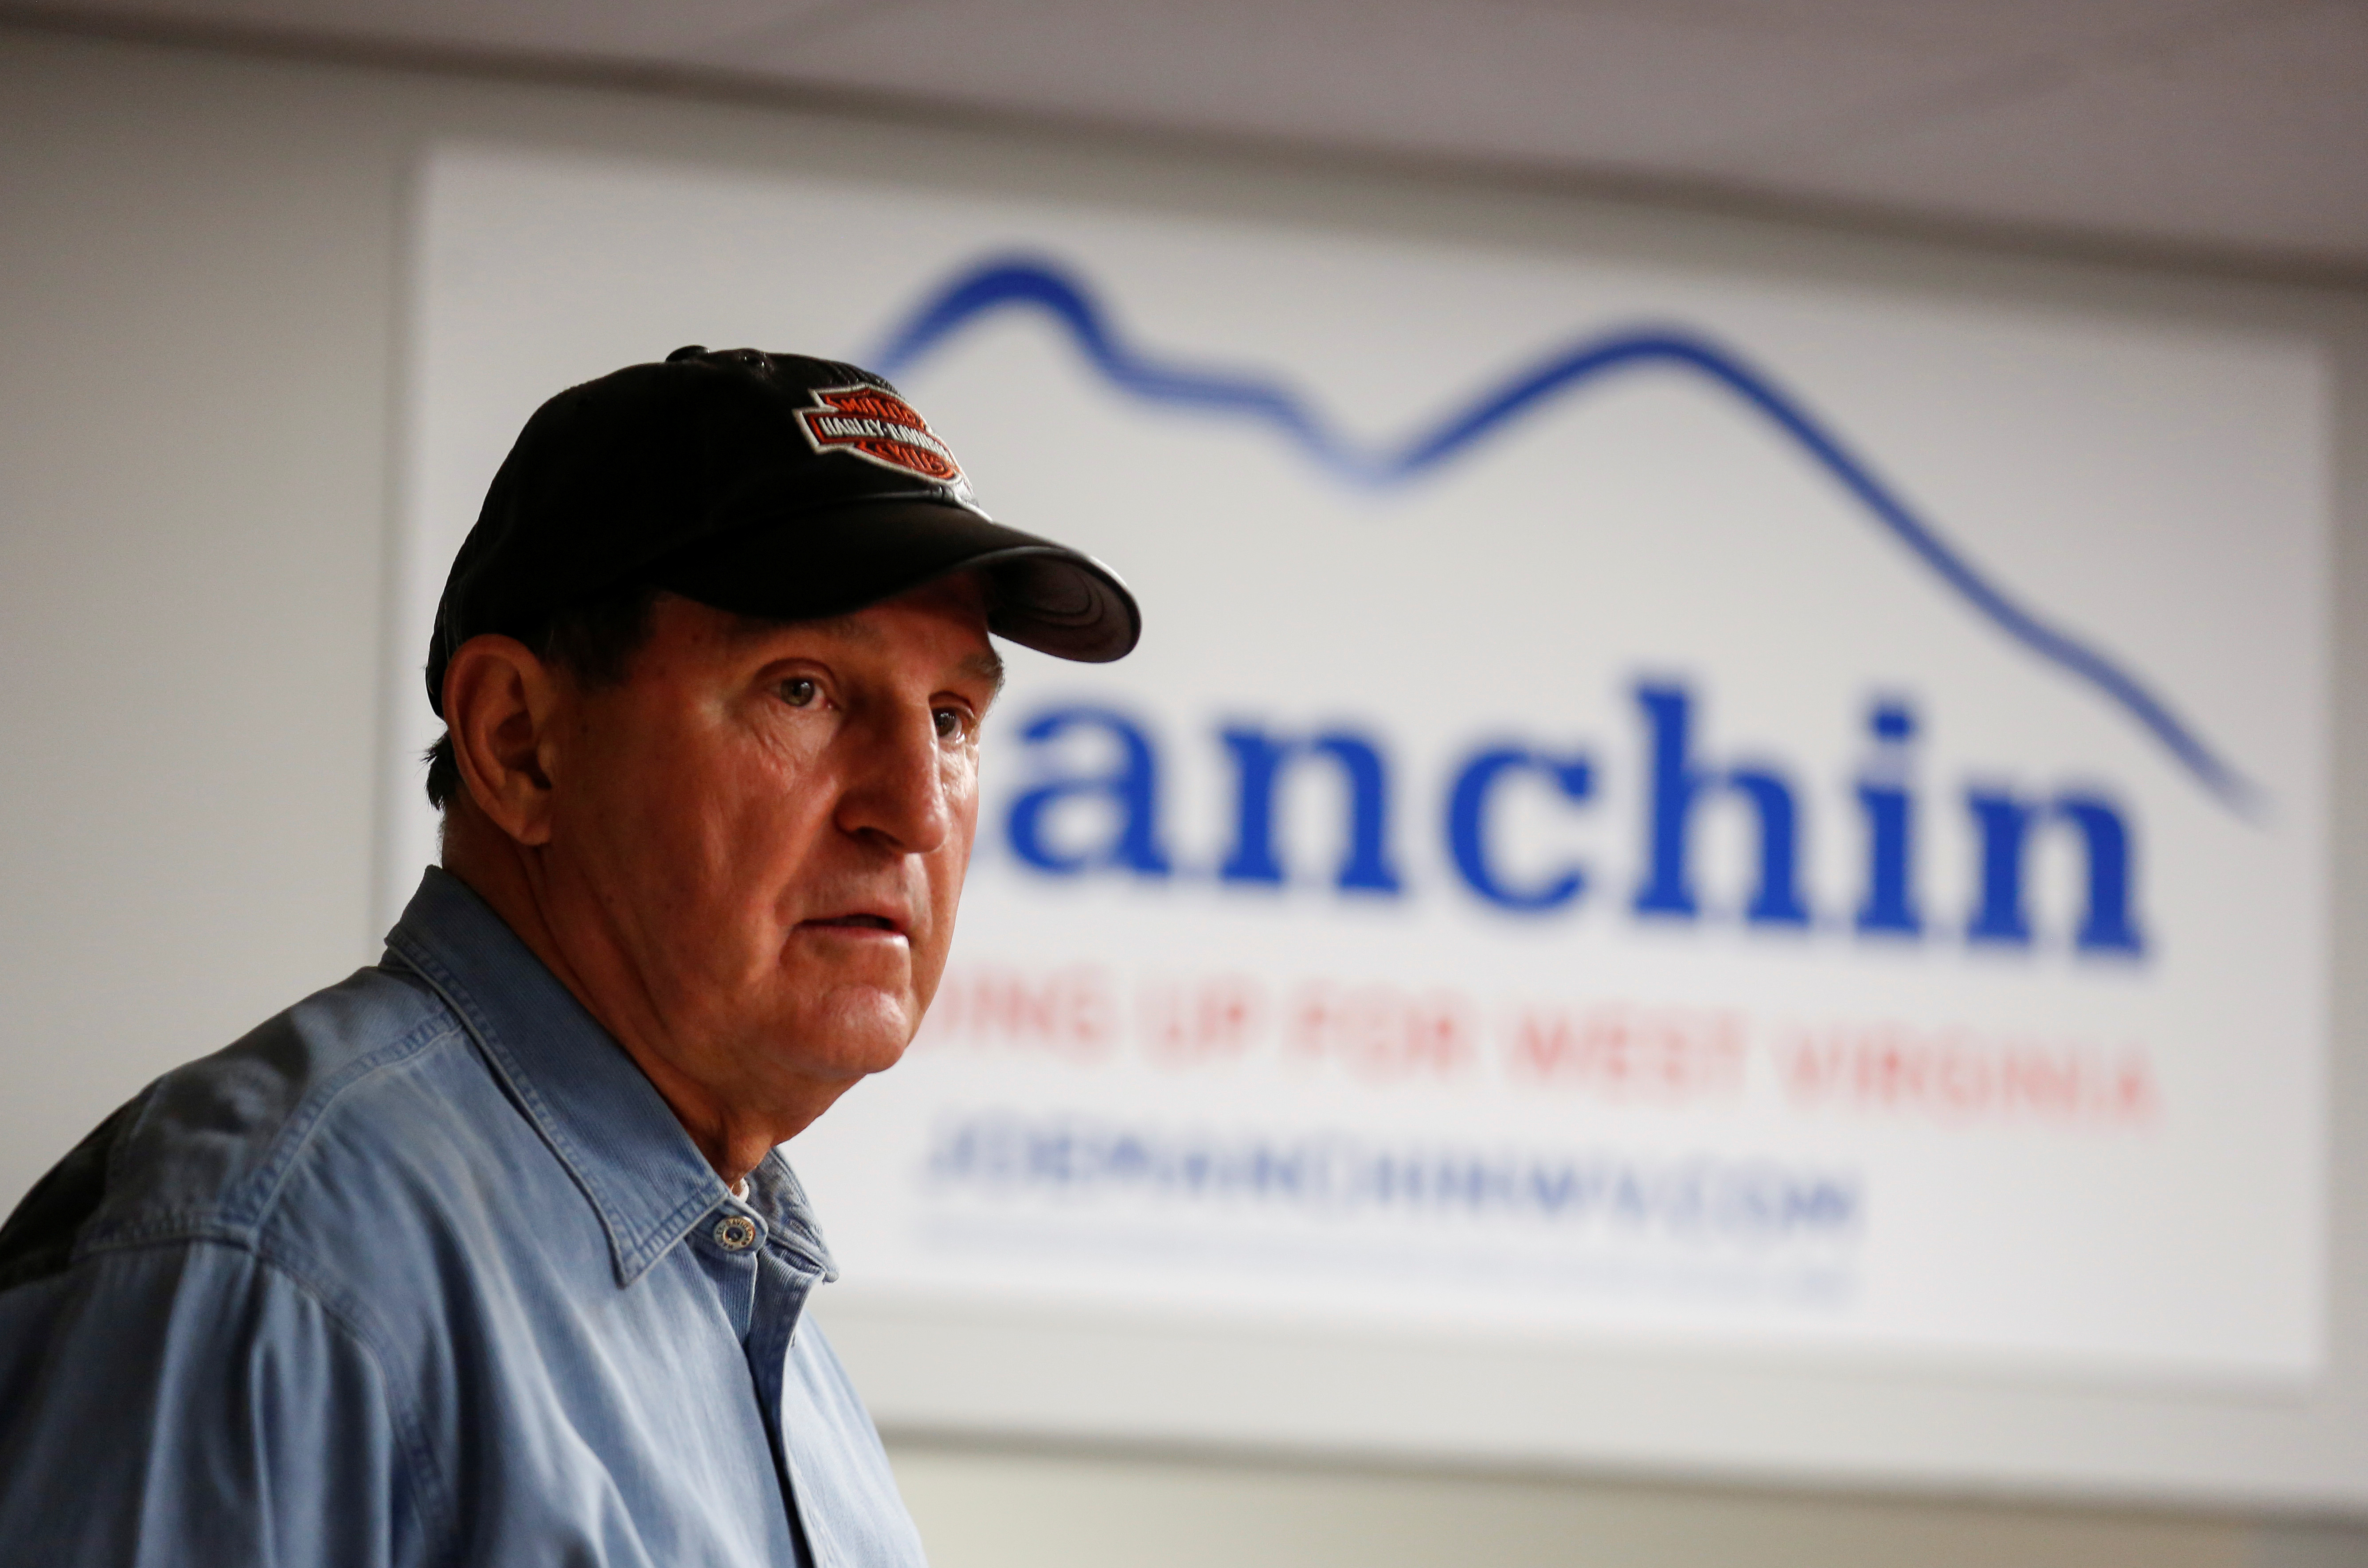 Senator Joe Manchin (D-WV) speaks to supporters after campaigning for the 2018 midterm elections at his headquarters in Charlestown, West Virginia, U.S., November 5, 2018. REUTERS/Joshua Roberts - RC159A652940